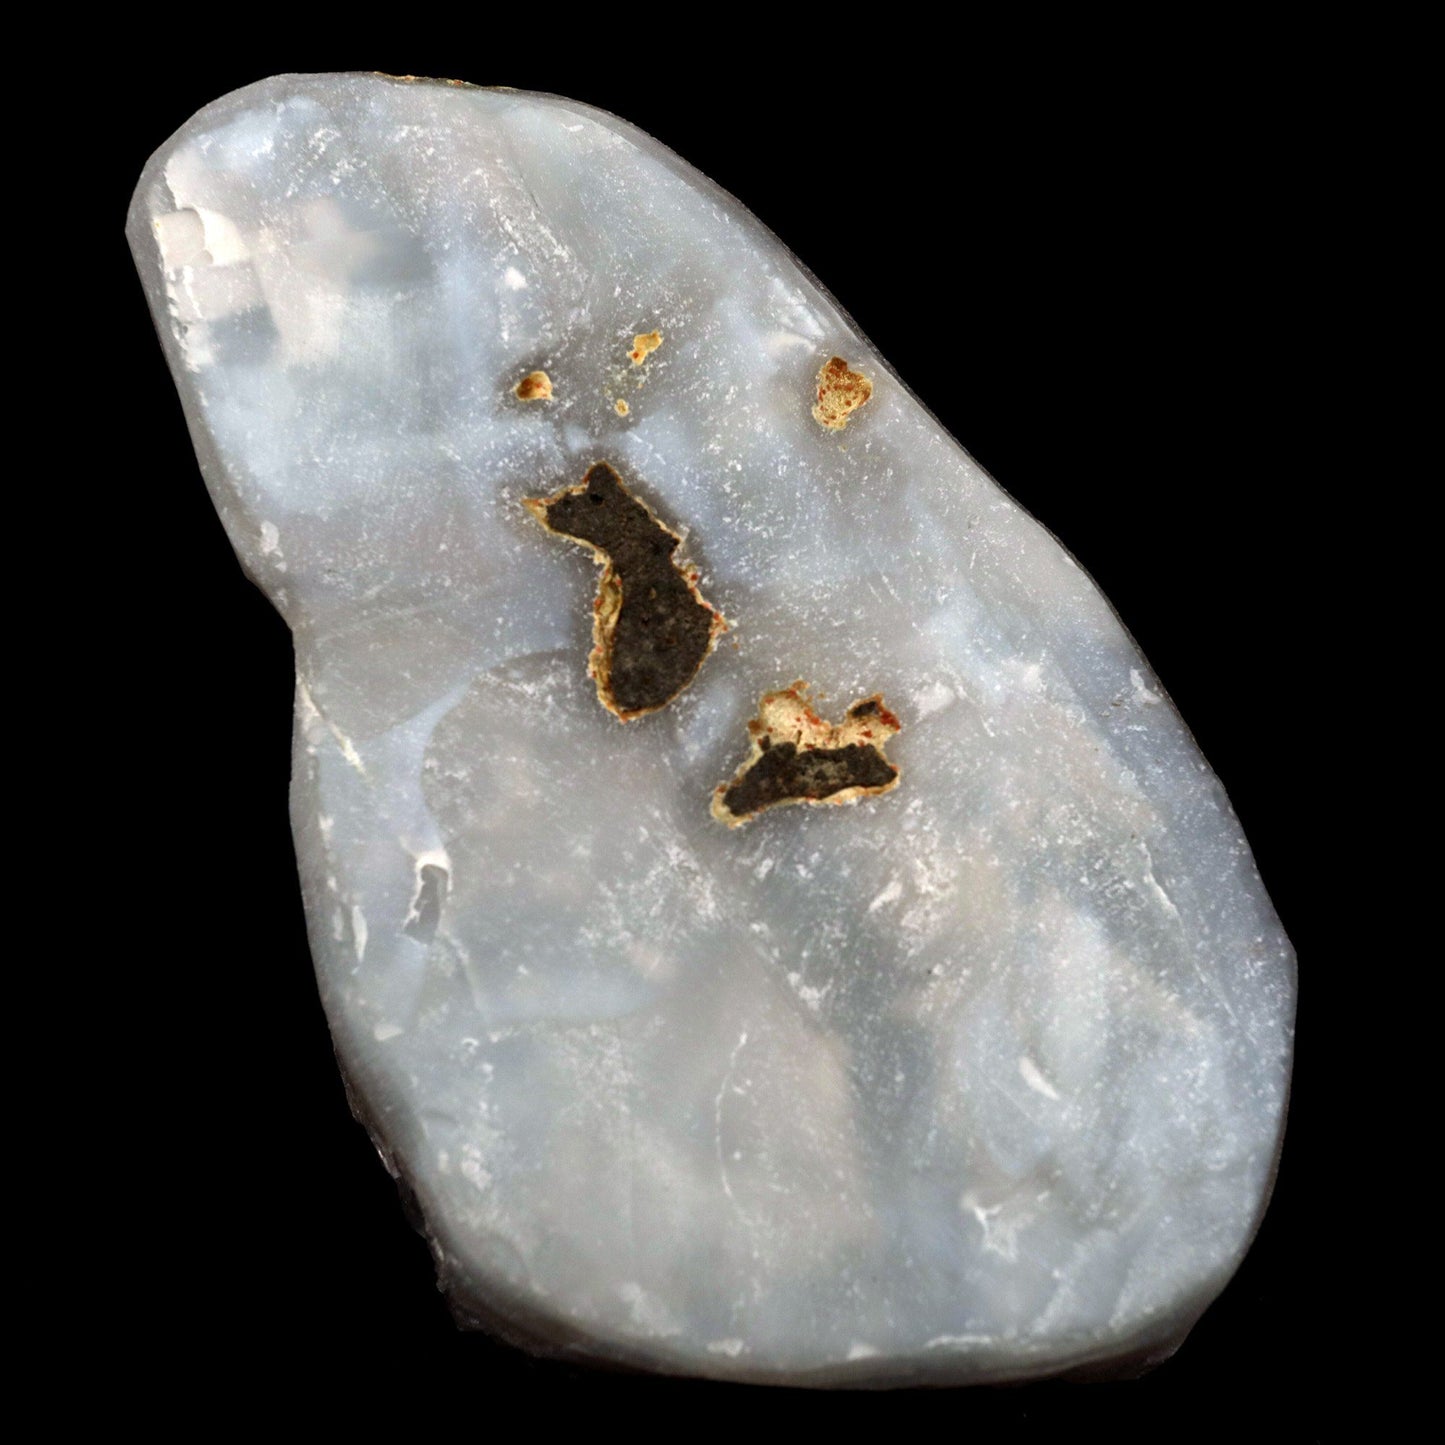 MM Quartz with Rainbow Effect 'Anandalite' Natural Mineral Specimen #…  https://www.superbminerals.us/products/mm-quartz-with-rainbow-effect-anandalite-natural-mineral-specimen-b-4794  Features: Anandalite is also known as Aurora Quartz or Rainbow Quartz, and is mined in India. The tiny little points of the clusters reflect luminescent rainbows that originate on the surface of the quartz (as opposed to the internal rainbows that reflect from within in other mineral specimens.) 